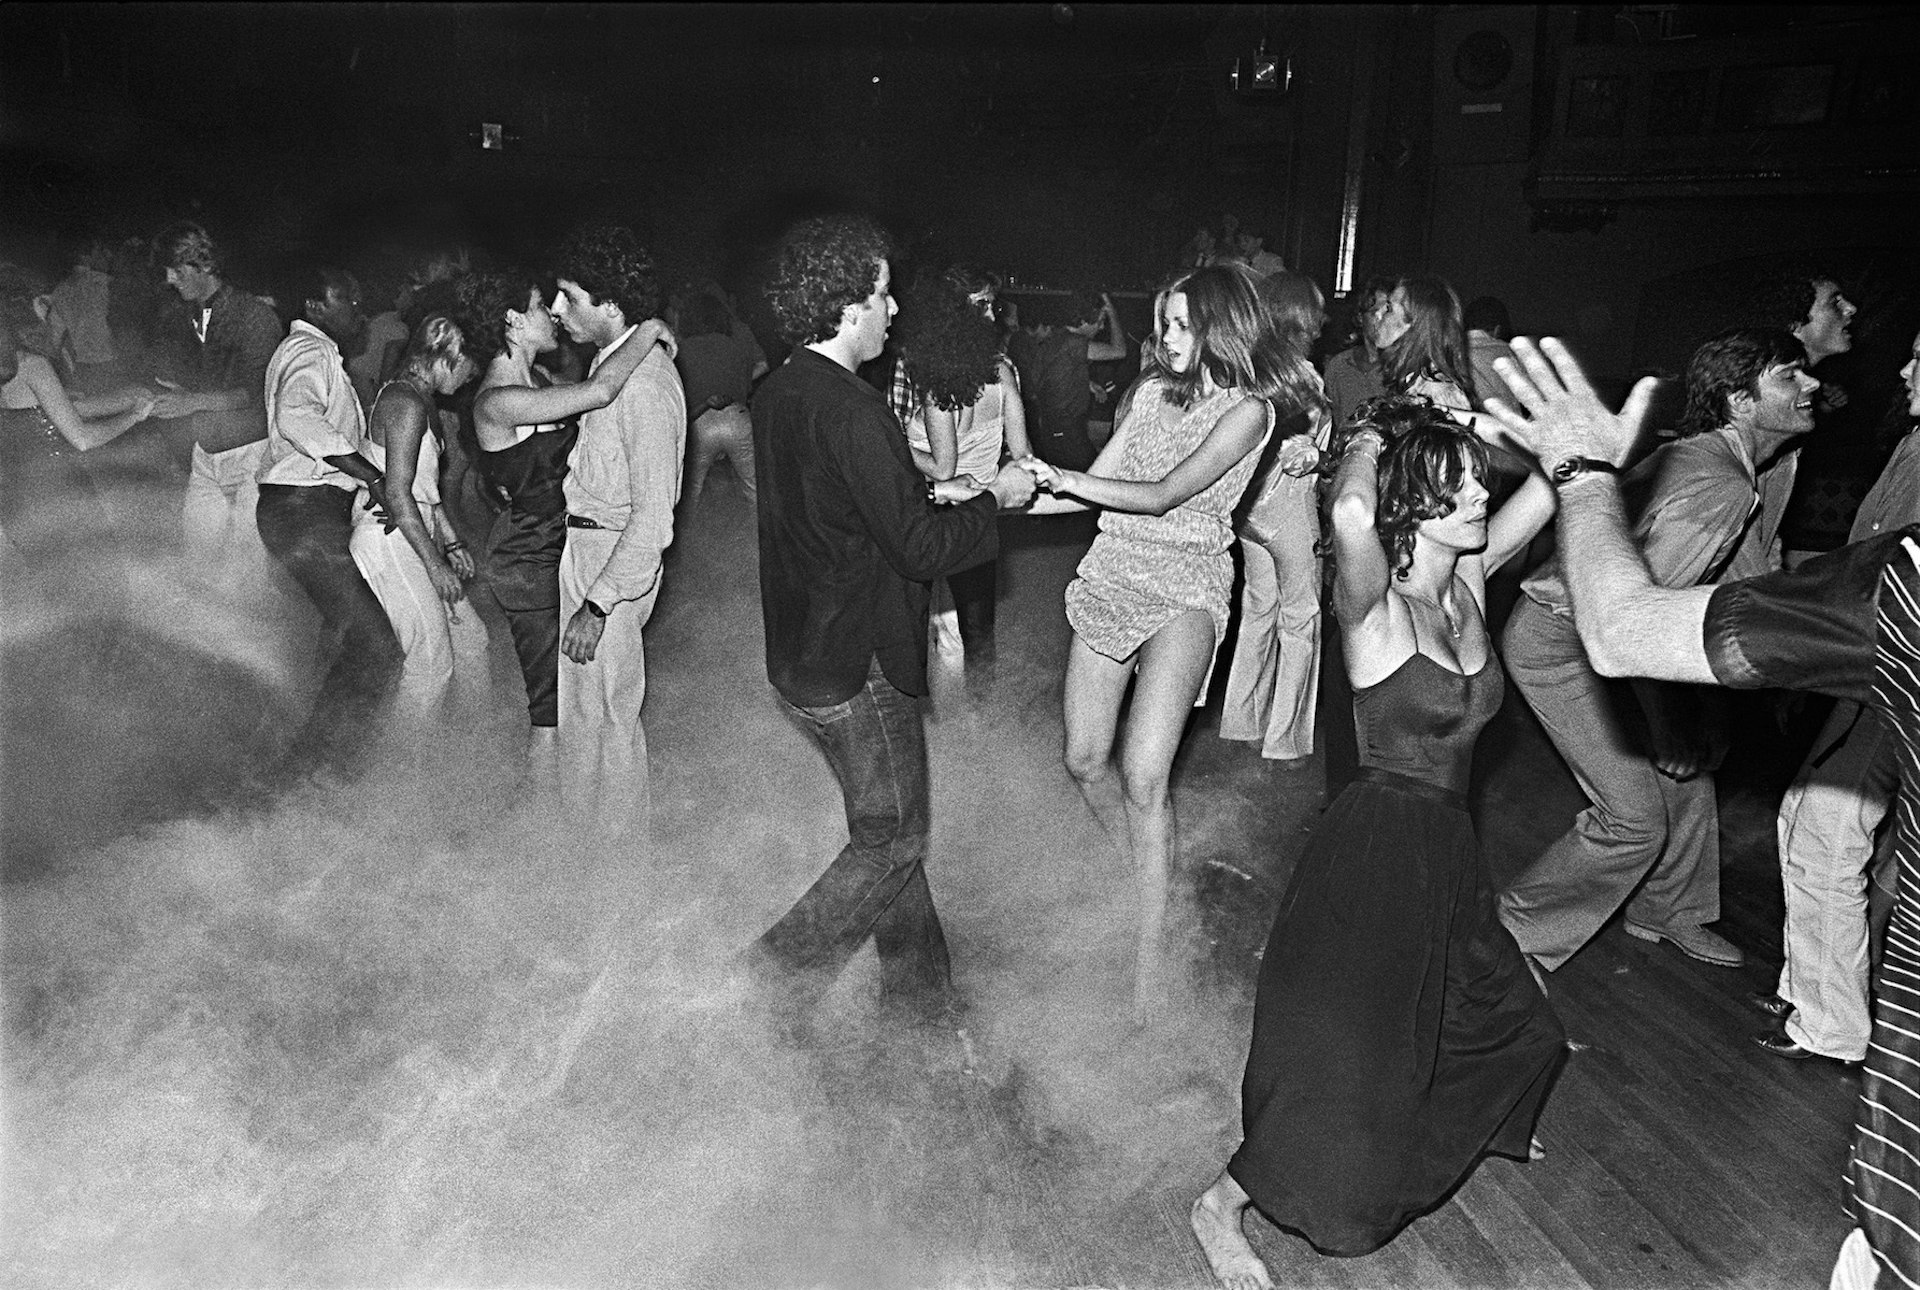 A photographic tribute to the halcyon days of disco